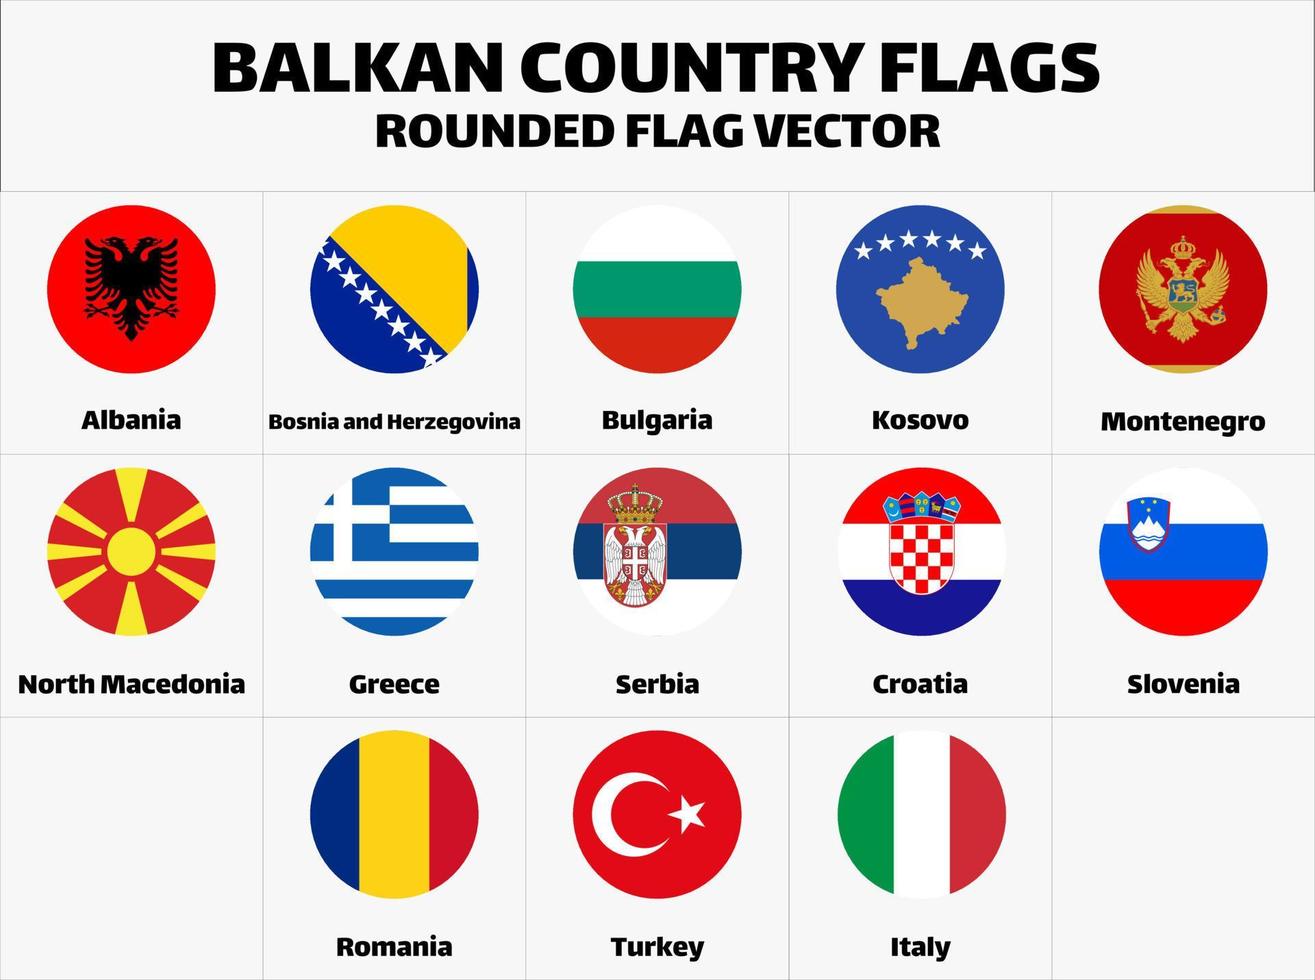 Balkan Country Flags Flat rounded vector